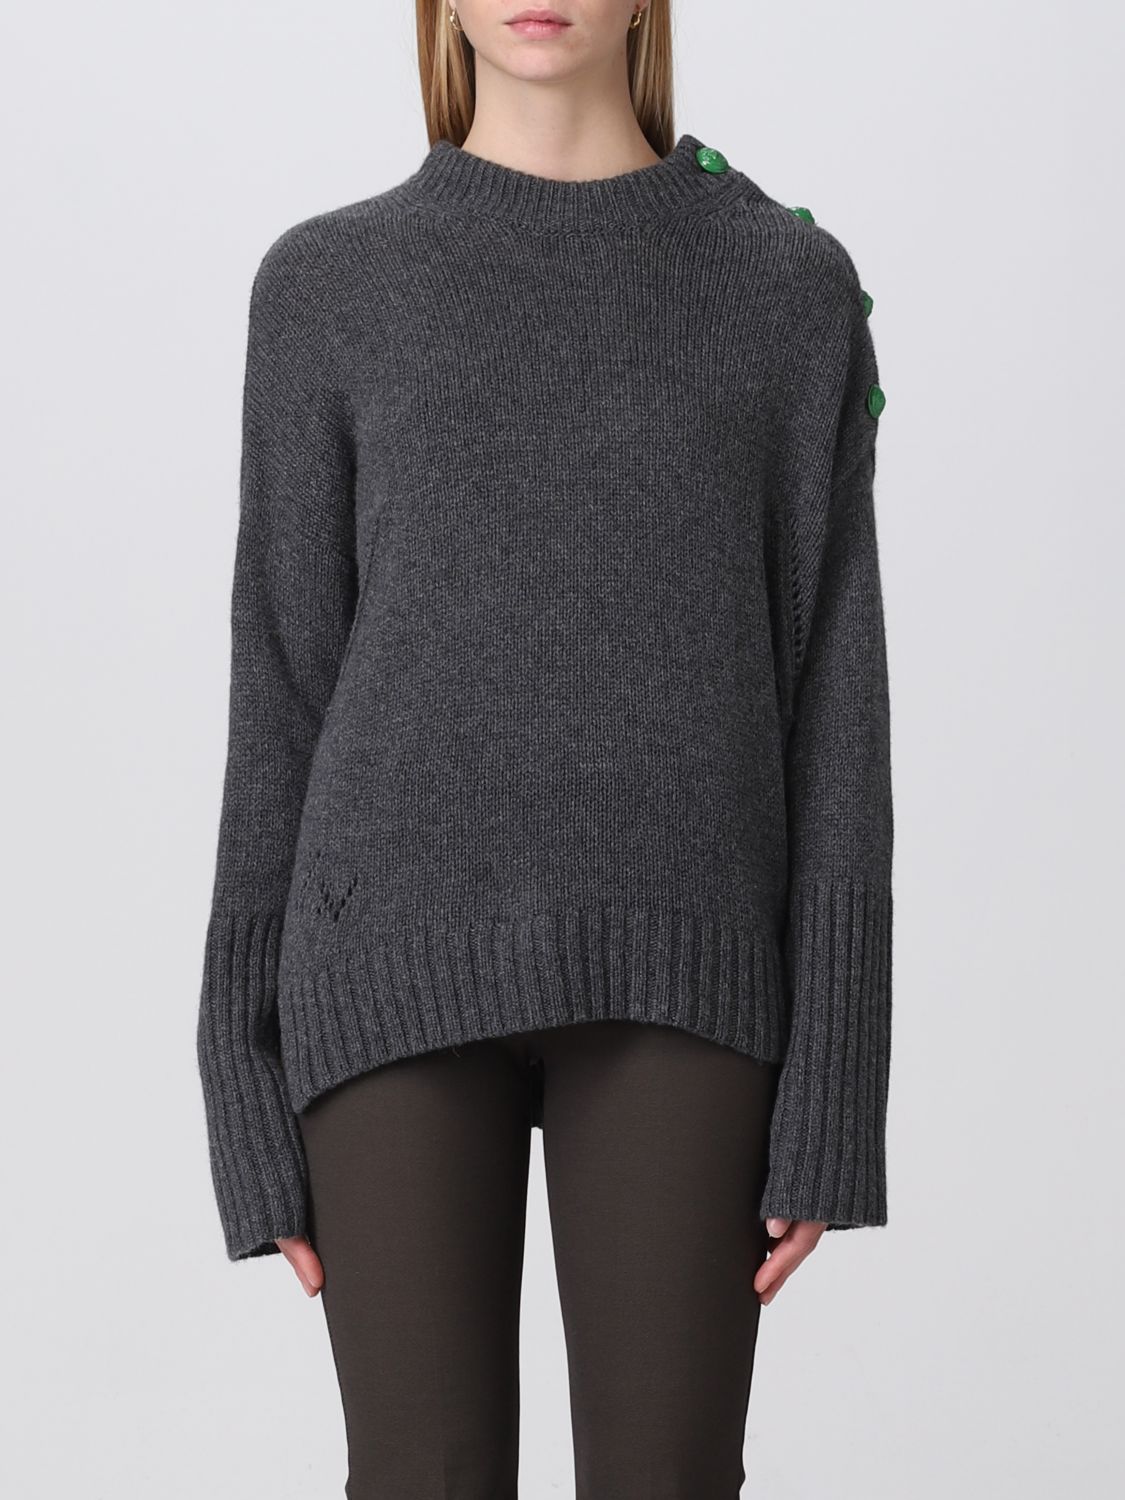 Zadig & Voltaire Jumper Woman In Charcoal | ModeSens